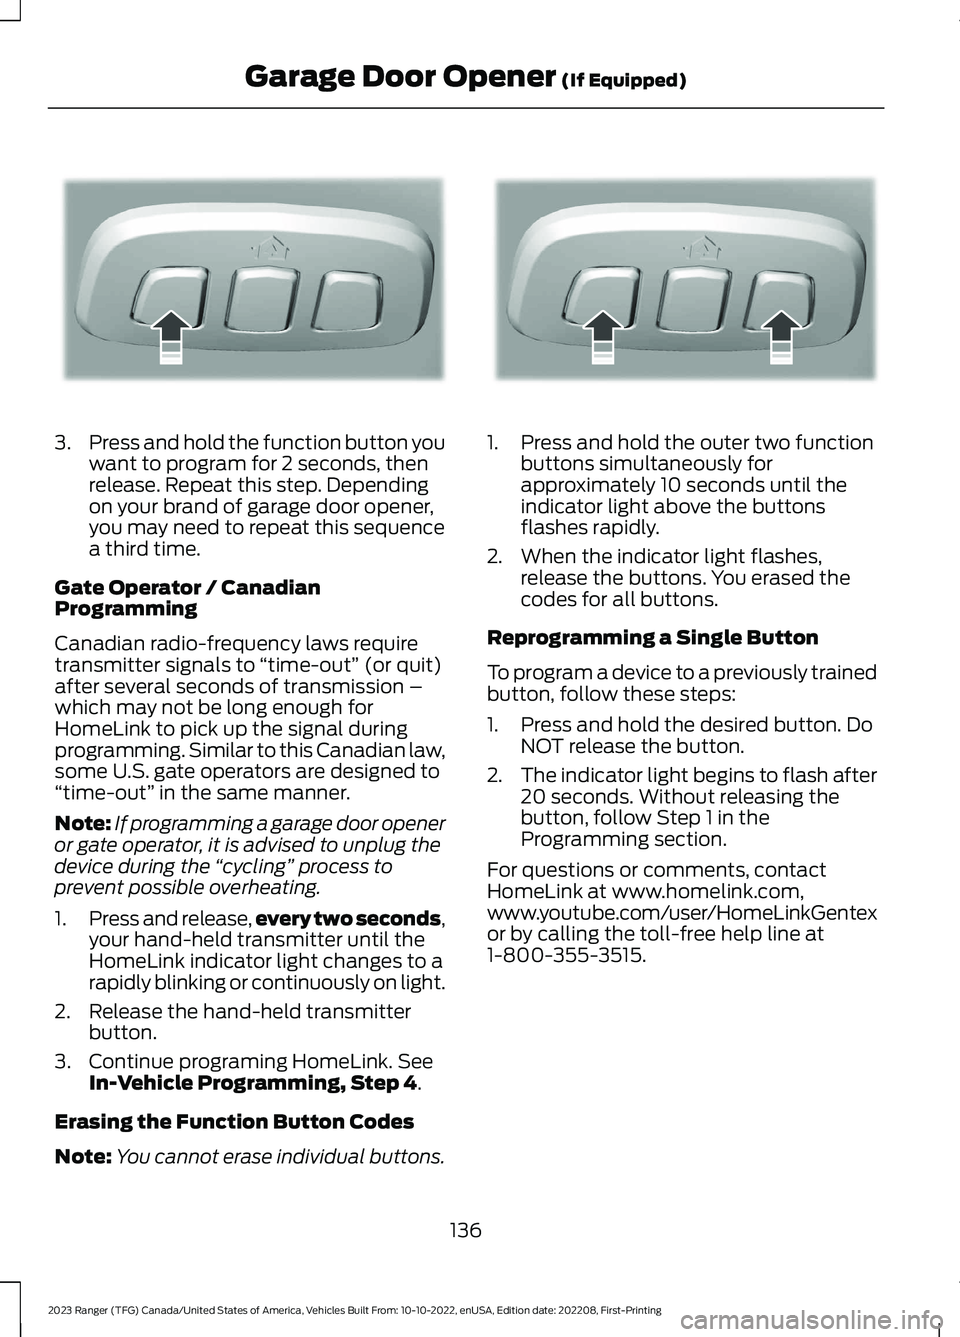 FORD RANGER 2023  Owners Manual 3.Press and hold the function button youwant to program for 2 seconds, thenrelease. Repeat this step. Dependingon your brand of garage door opener,you may need to repeat this sequencea third time.
Gat